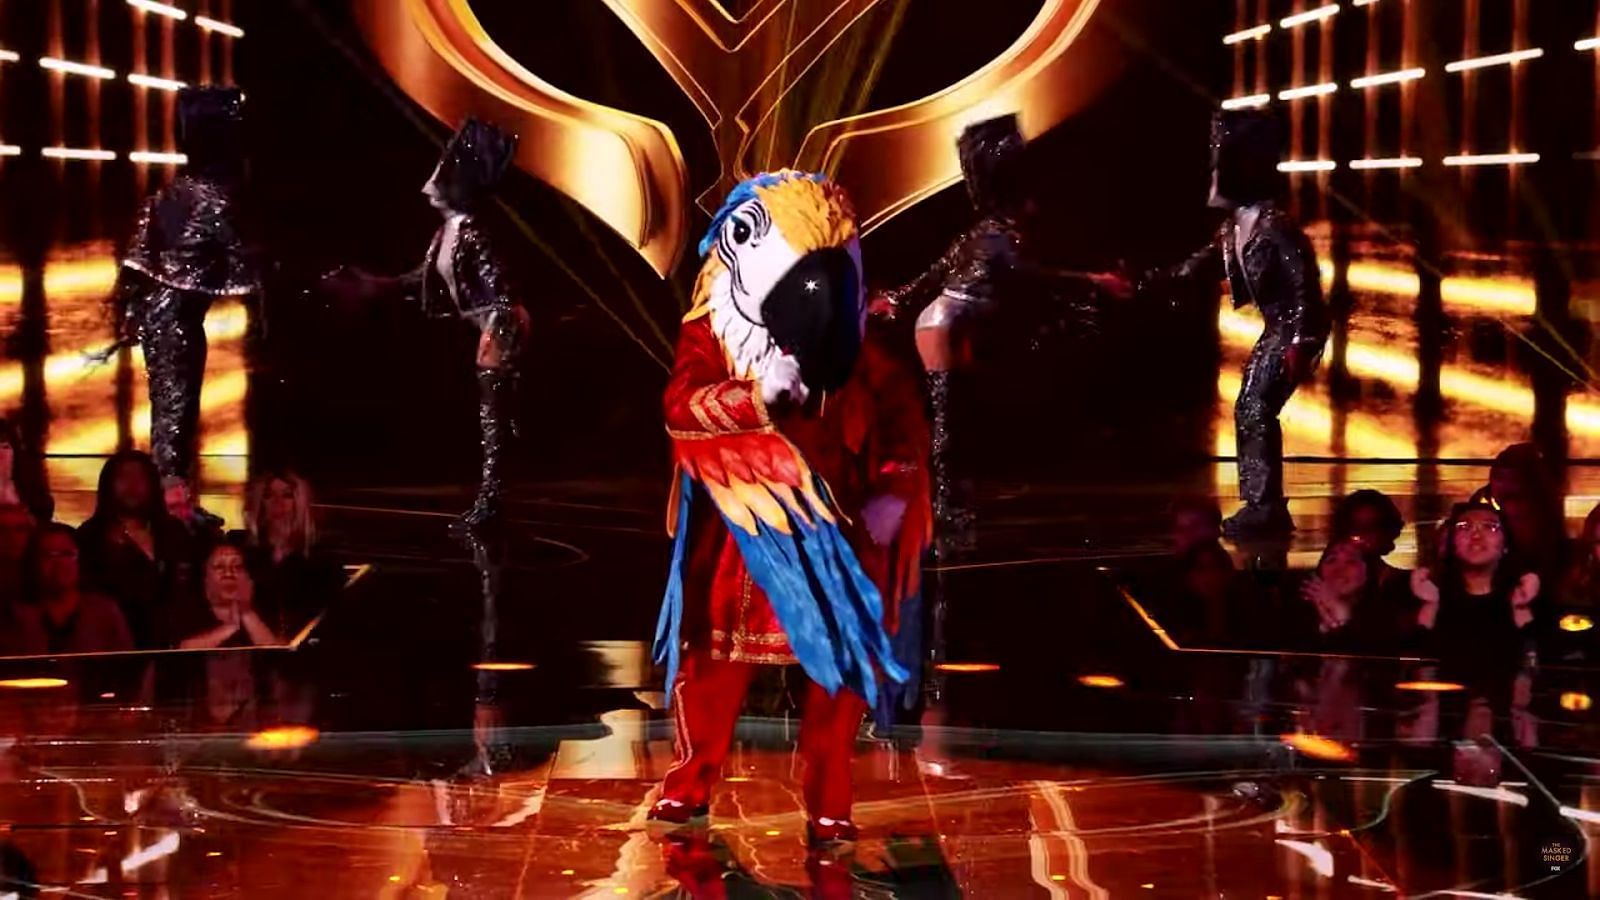 What is The Masked Singer about?